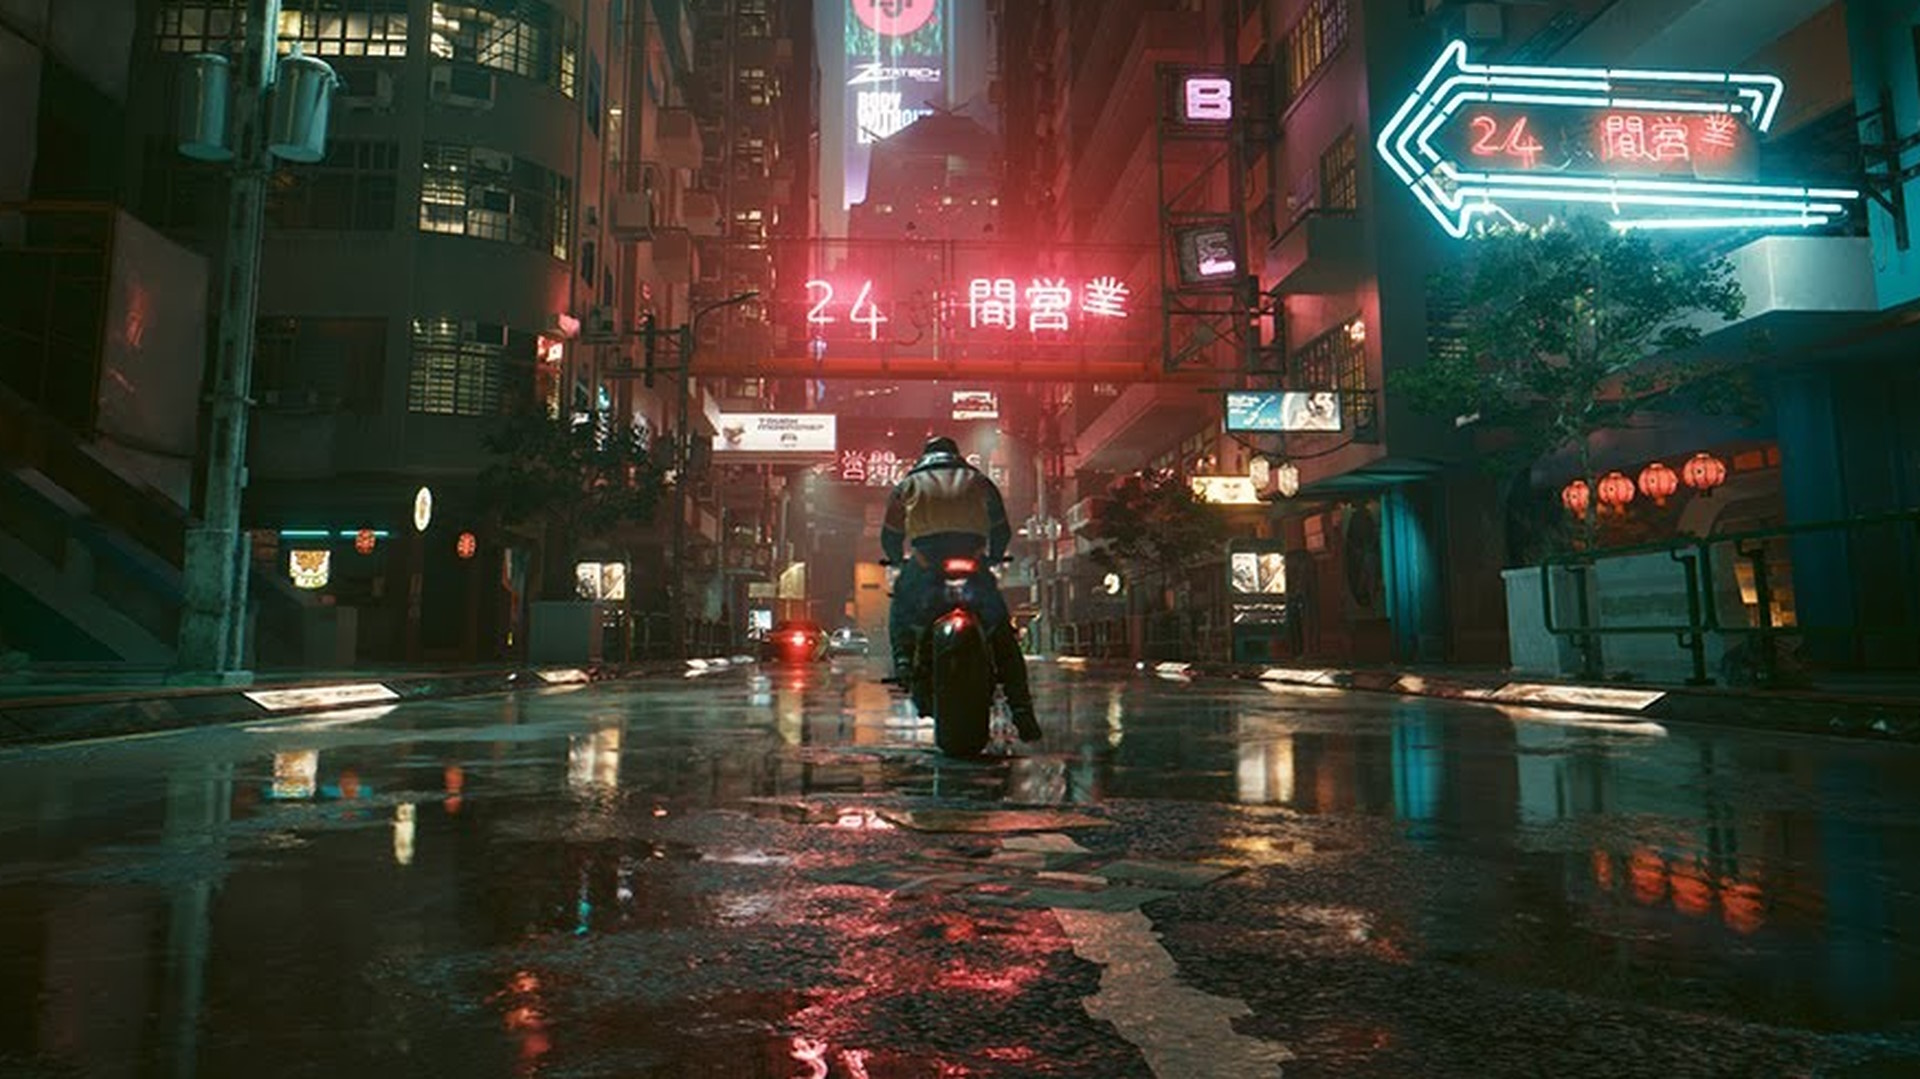  Intel Arc GPU performance bumped by over 70% in Cyberpunk 2077 thanks to XeSS 